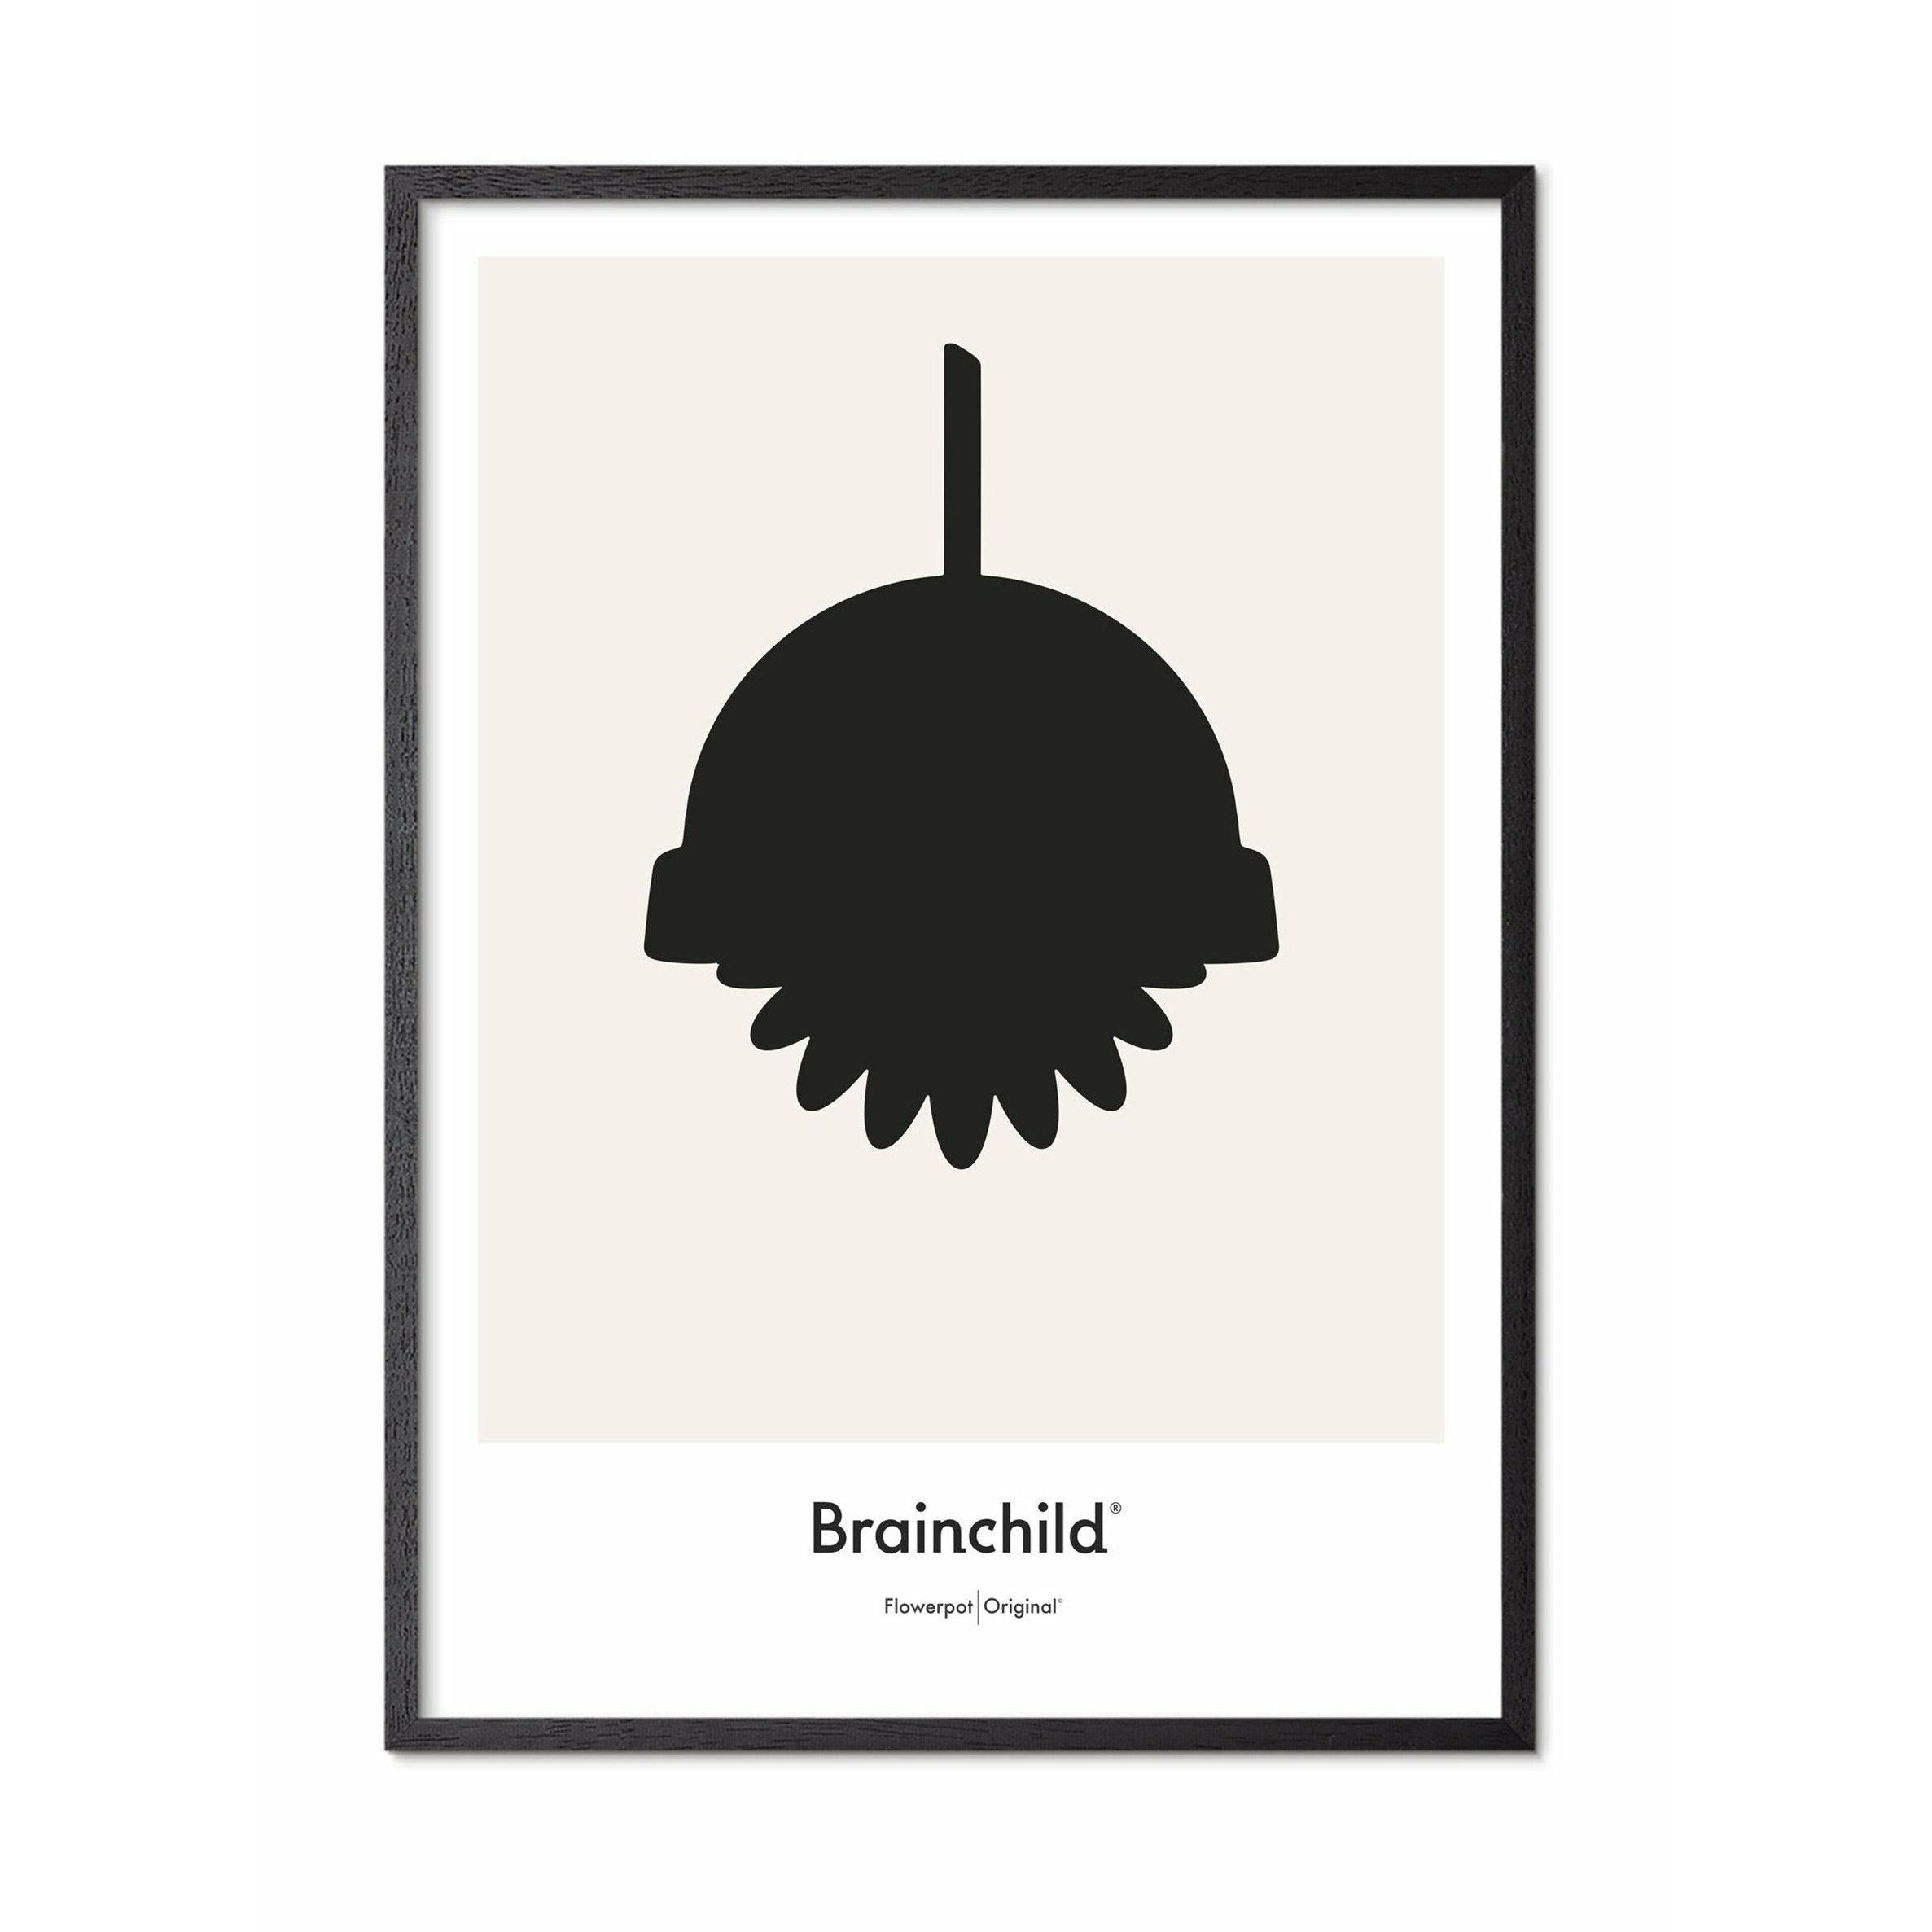 Brainchild Flowerpot Design Icon Poster, Frame In Black Lacquered Wood A5, Grey